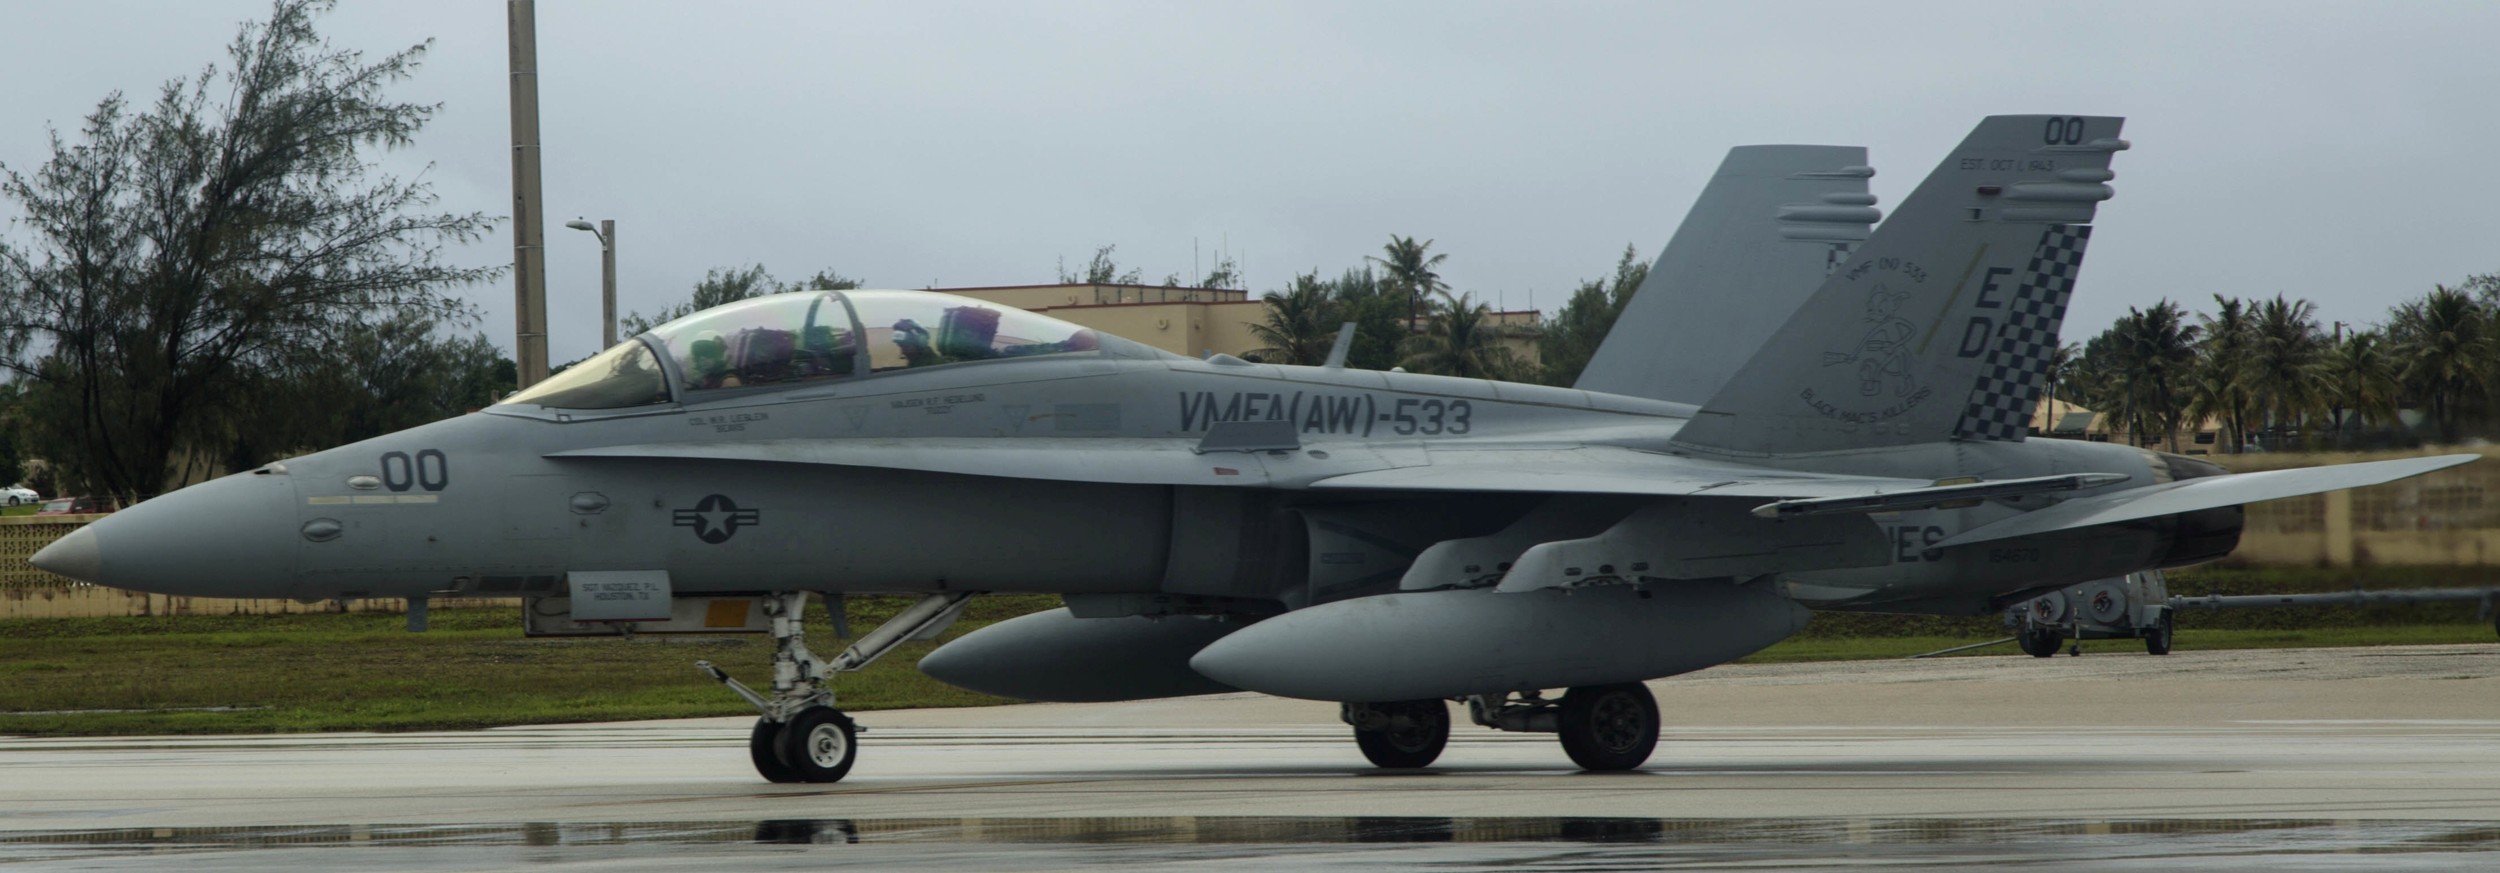 vmfa(aw)-533 hawks marine fighter attack squadron usmc f/a-18d hornet 20 exercise valiant shield